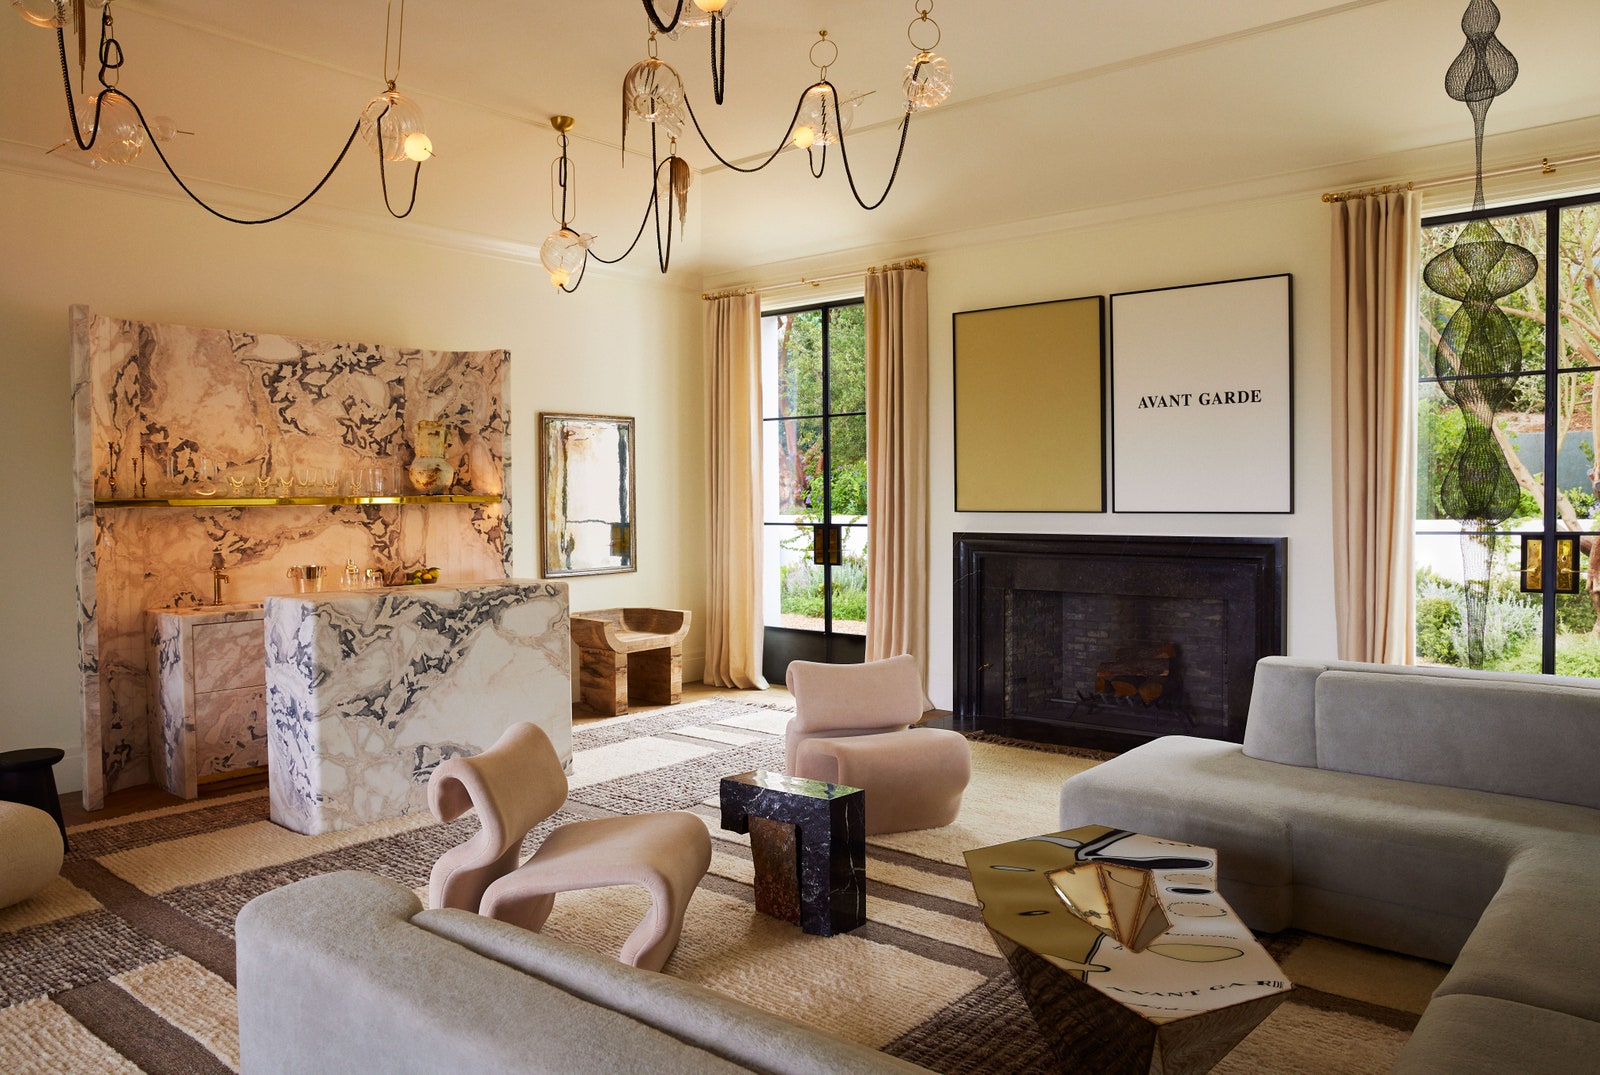 Gwyneth Paltrow's Home Tour, As Seen in Architectural Digest | lark & linen